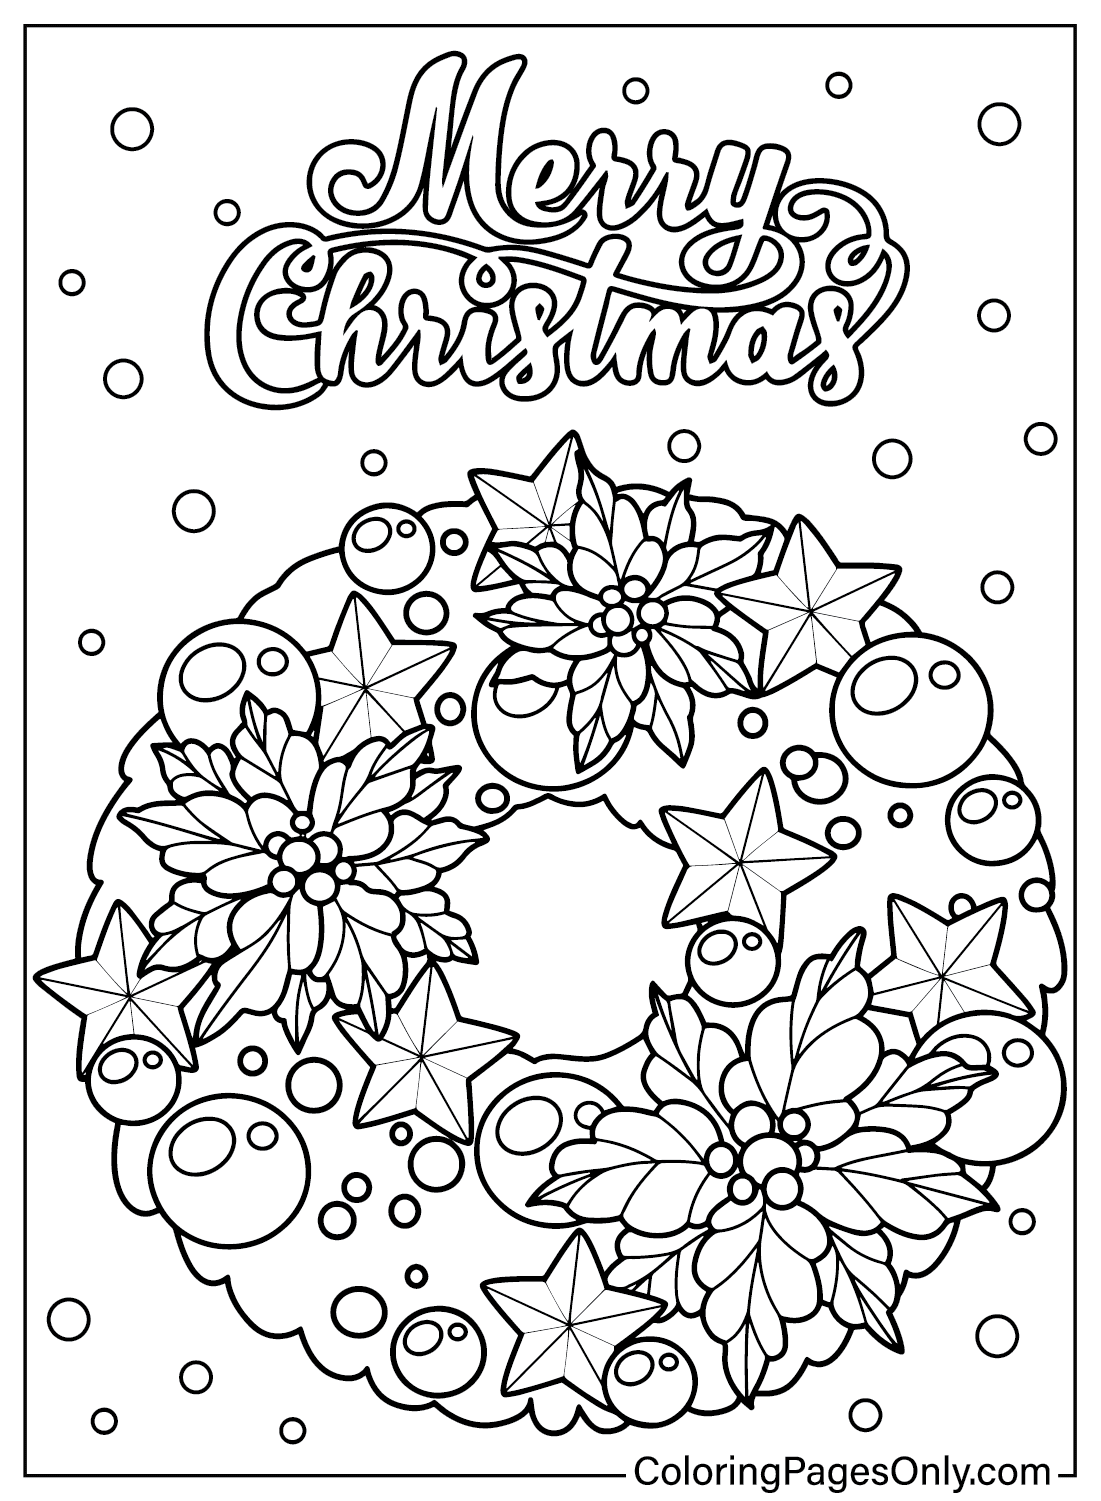 Christmas Wreath Coloring Sheet for Kids from Christmas Wreath